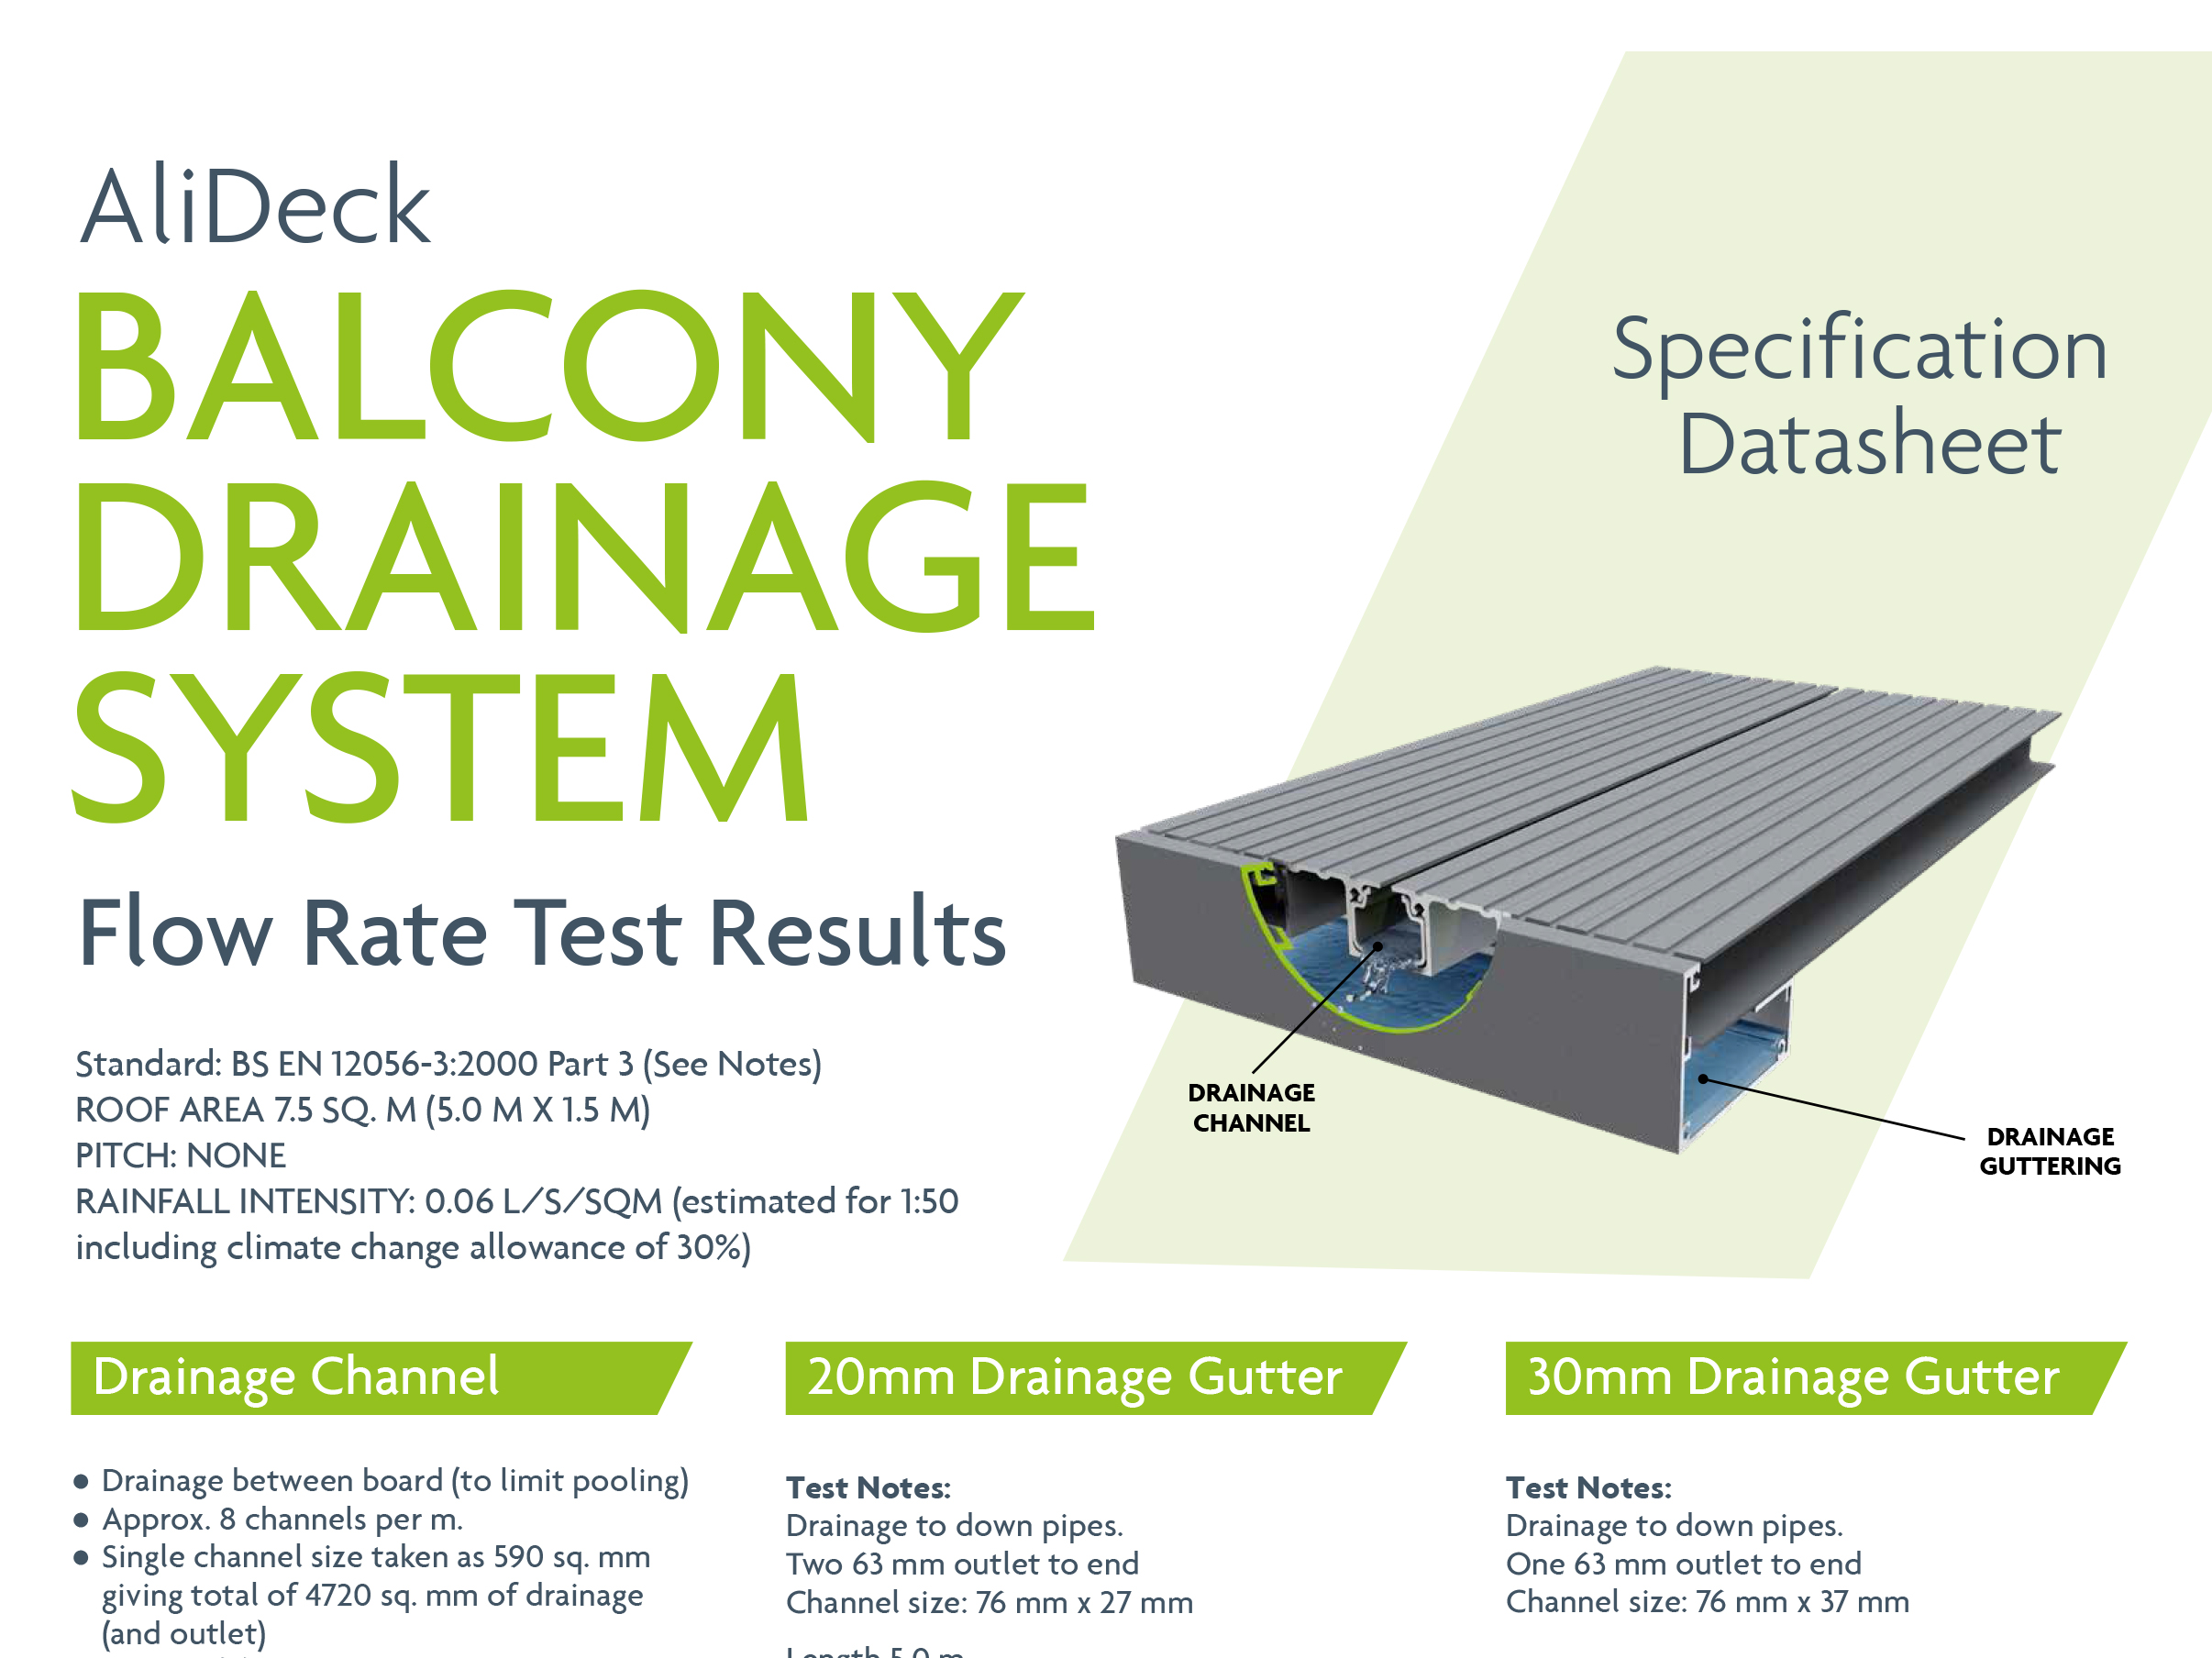 AliDeck Non-Combustible Aluminium Metal Decking Balcony Drainage System Flow Rate Test Result